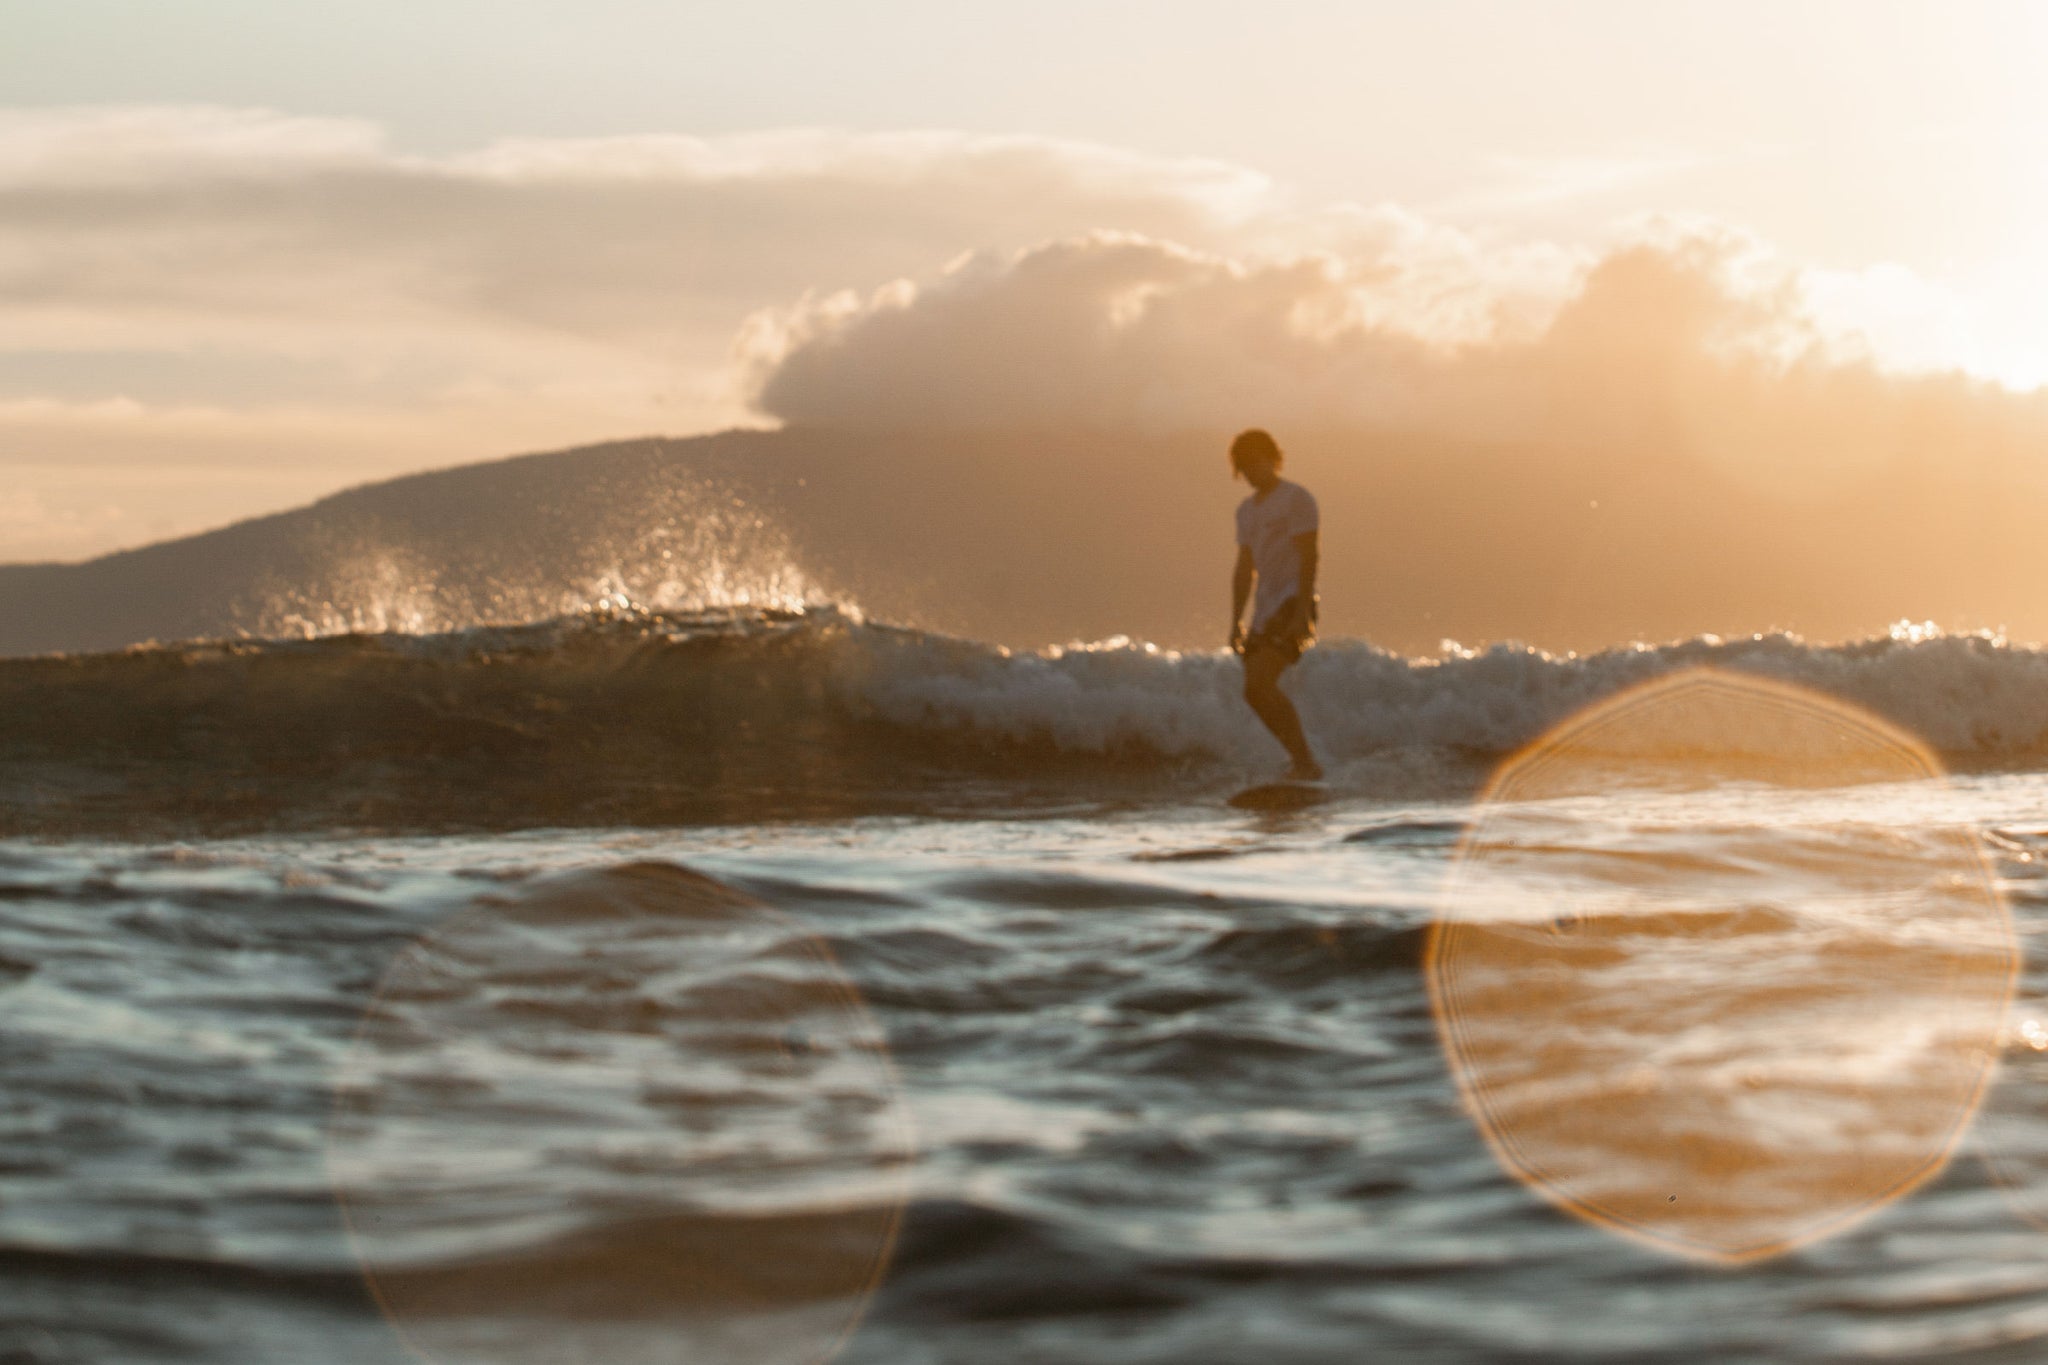 Surfing in Hawaii during sunset